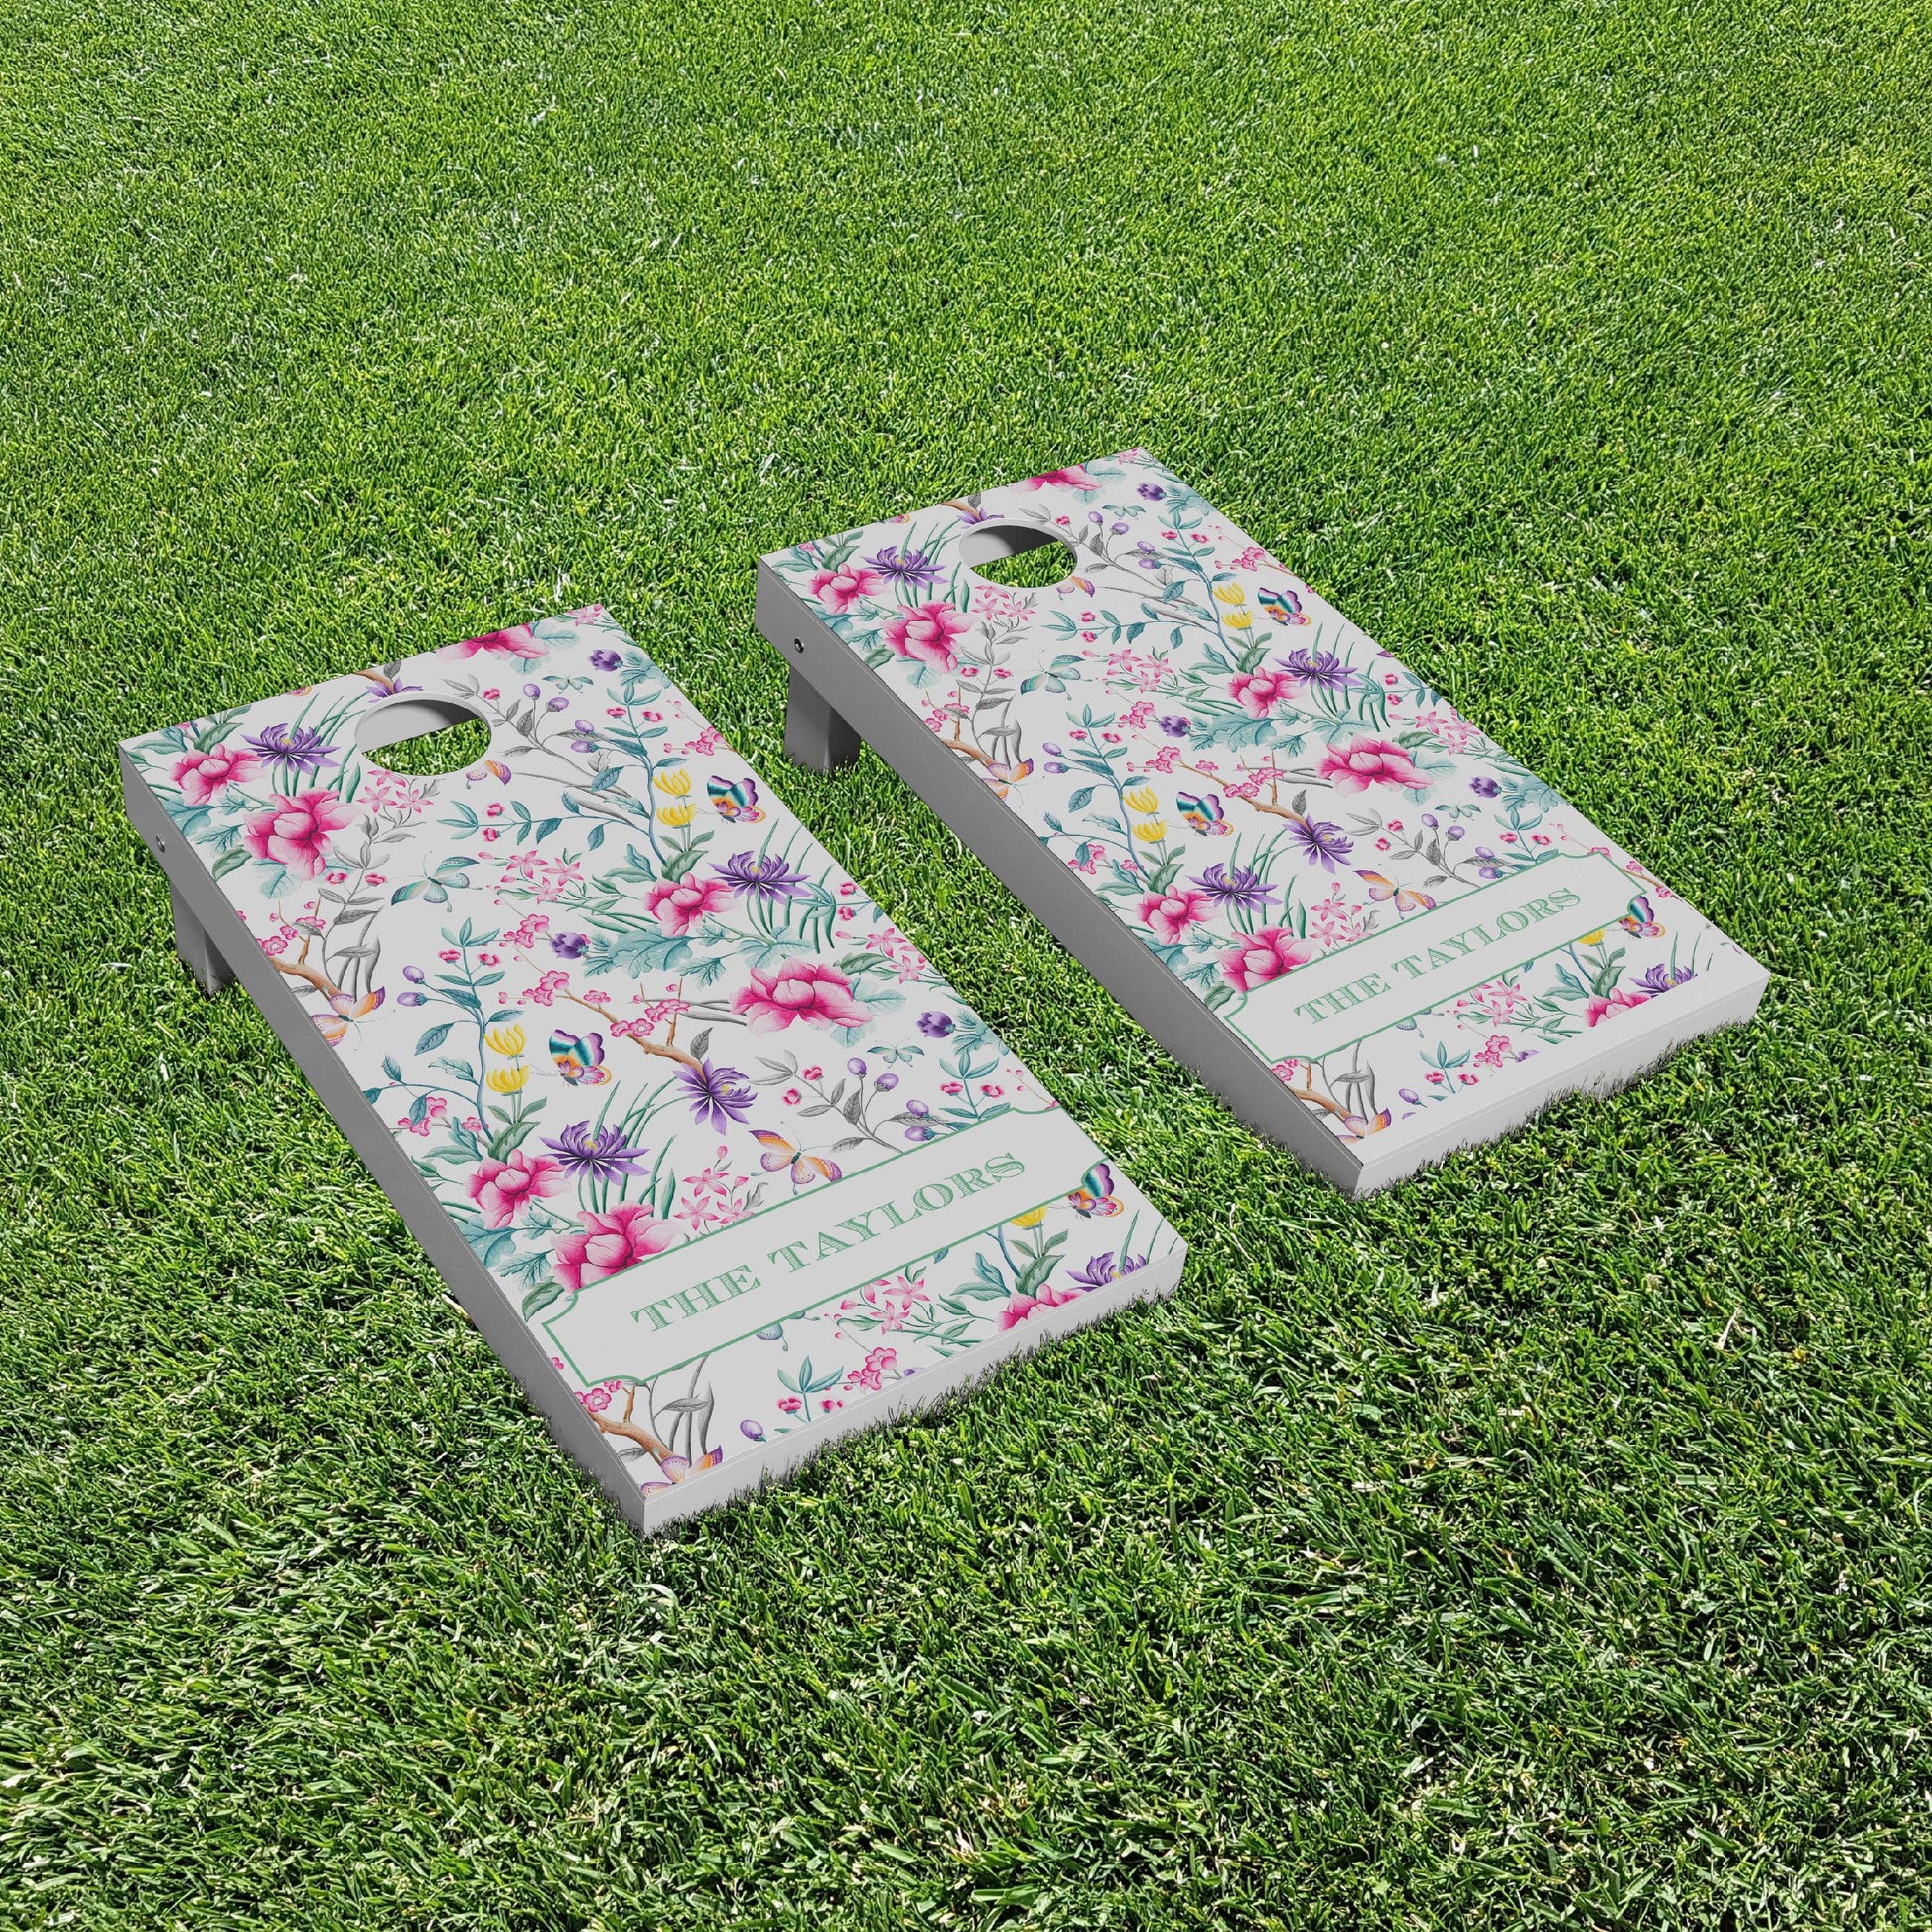 Chinoiserie Cornhole Boards With Flowers and Birds